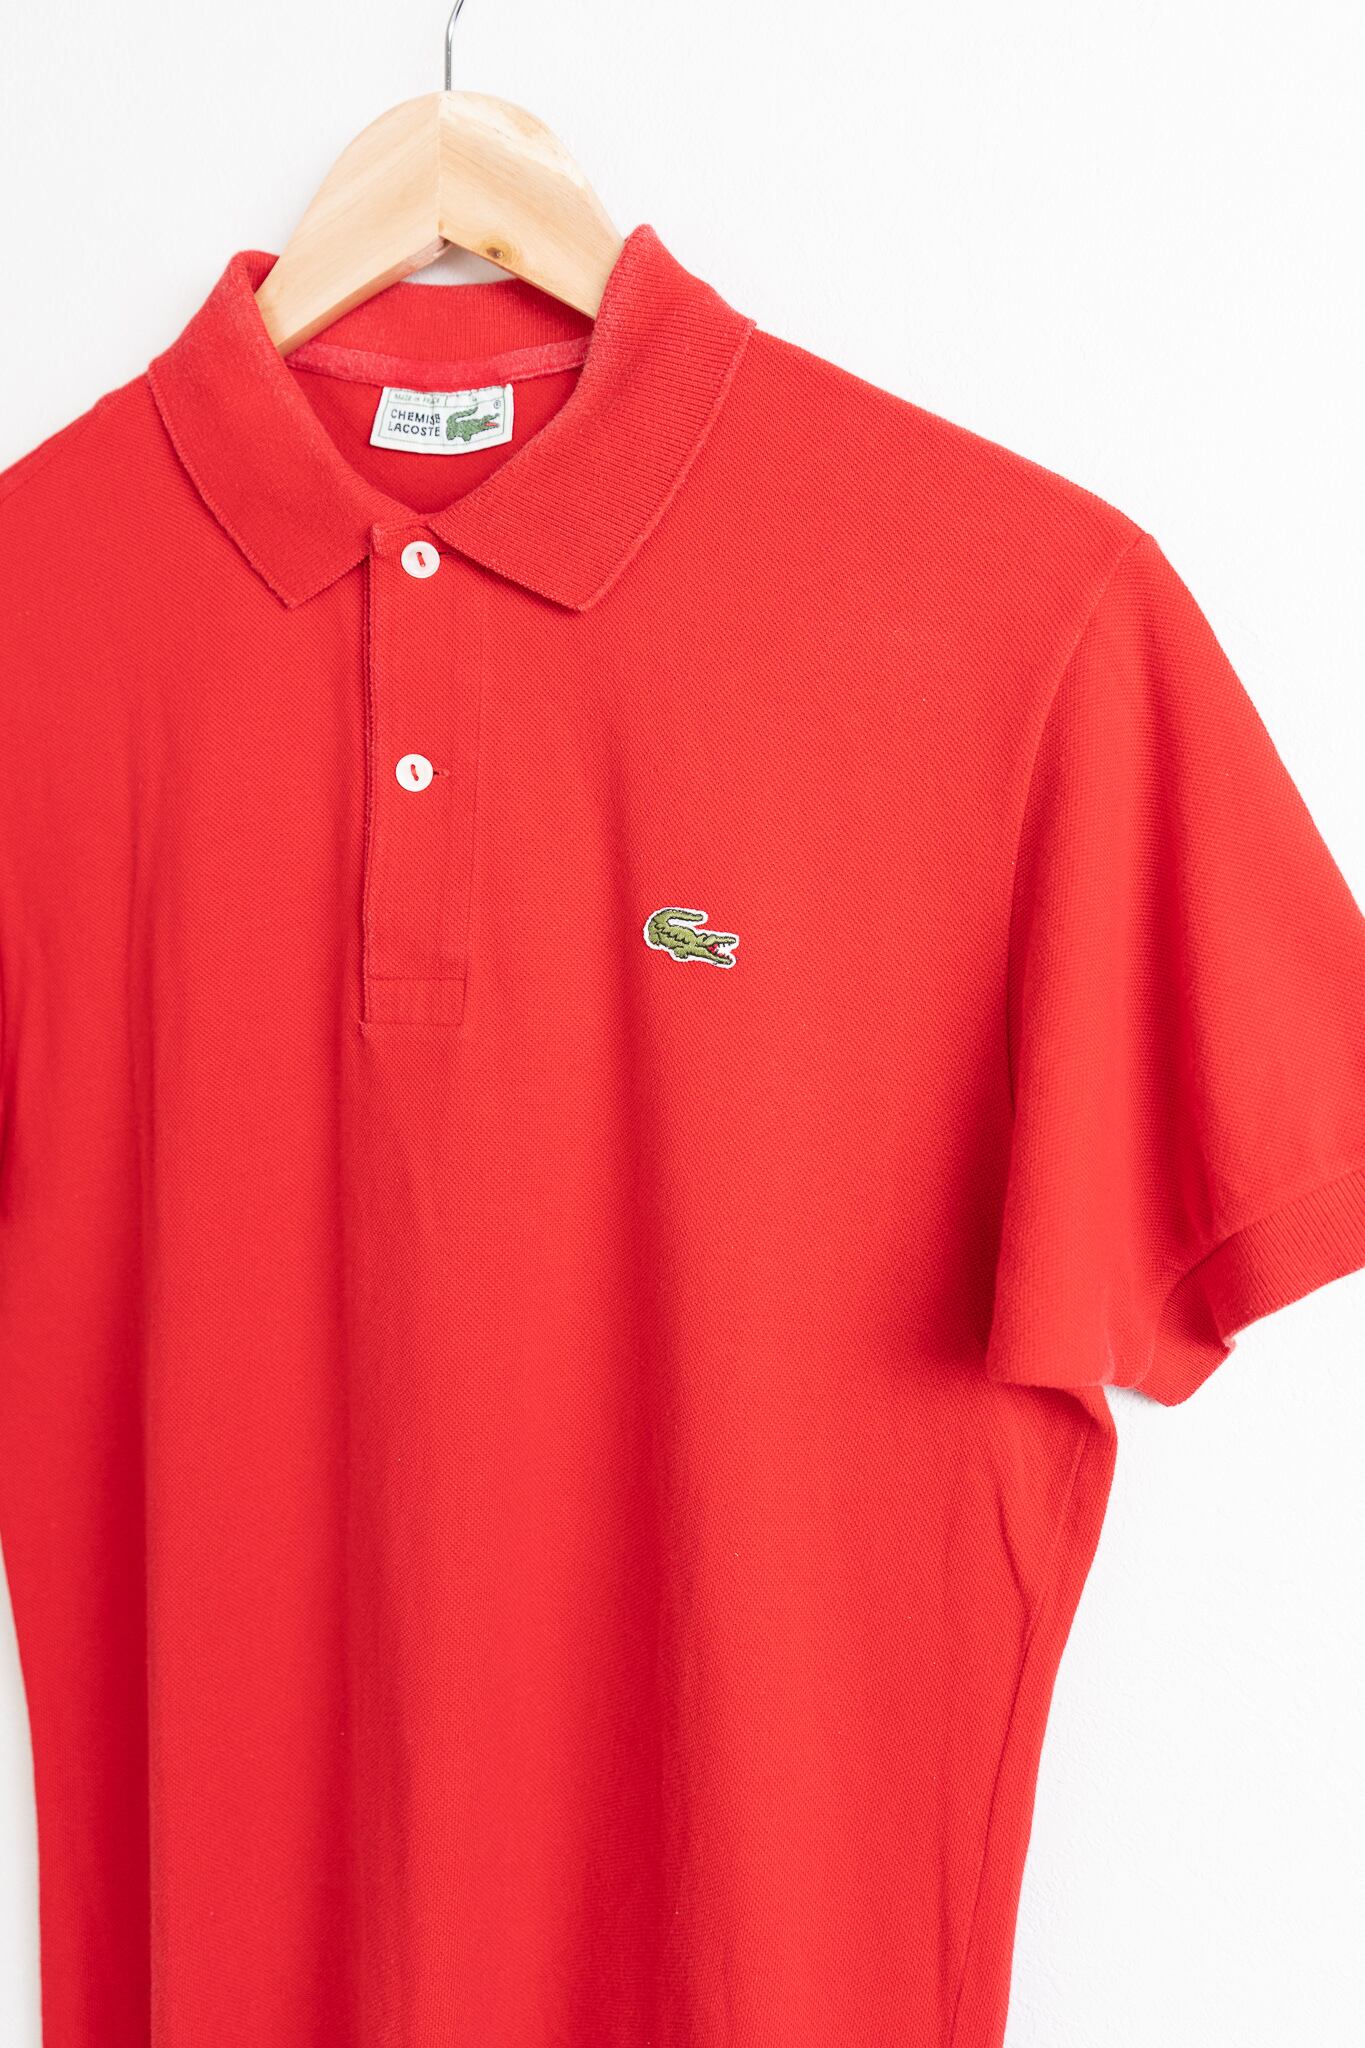 1970s-80s】CHEMISE LACOSTE Polo Shirts Made in France フレンチラコステ ポロシャツ FL12 |  FAR EAST SIGNAL